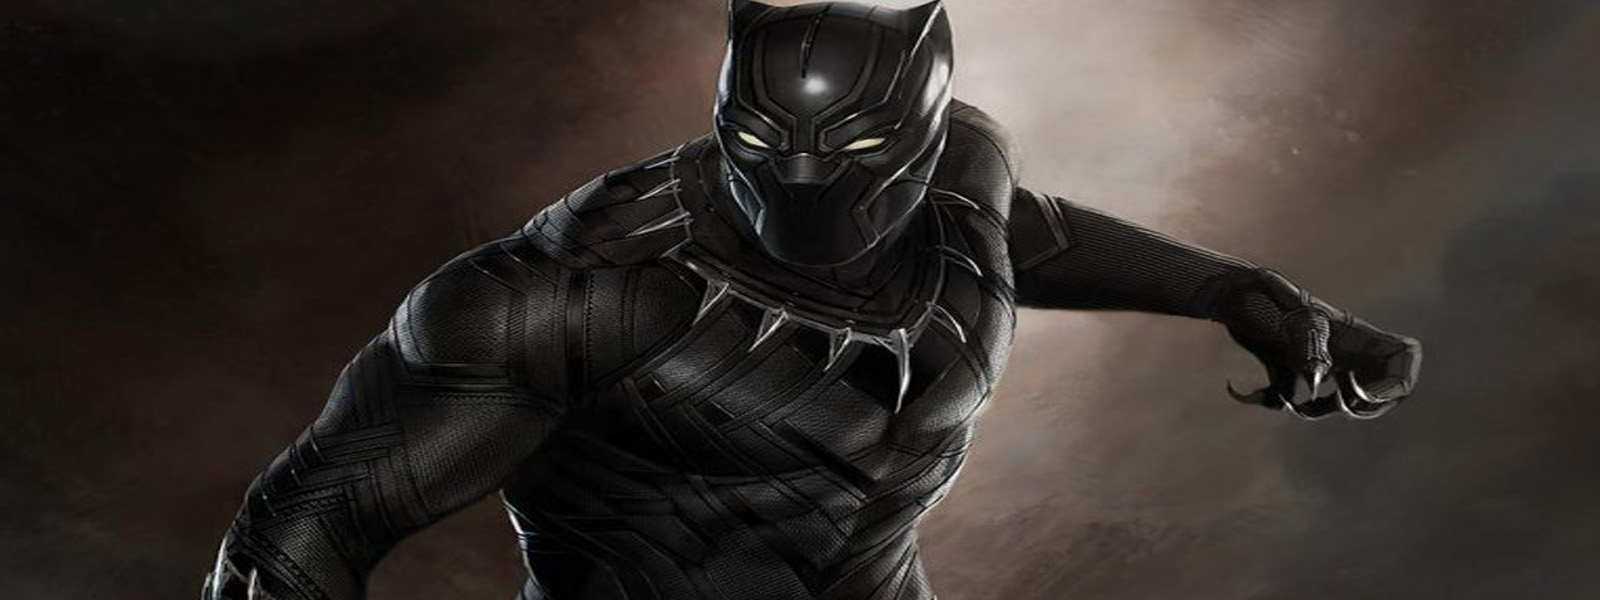 Tesco apologises for Black Panther costume mistake